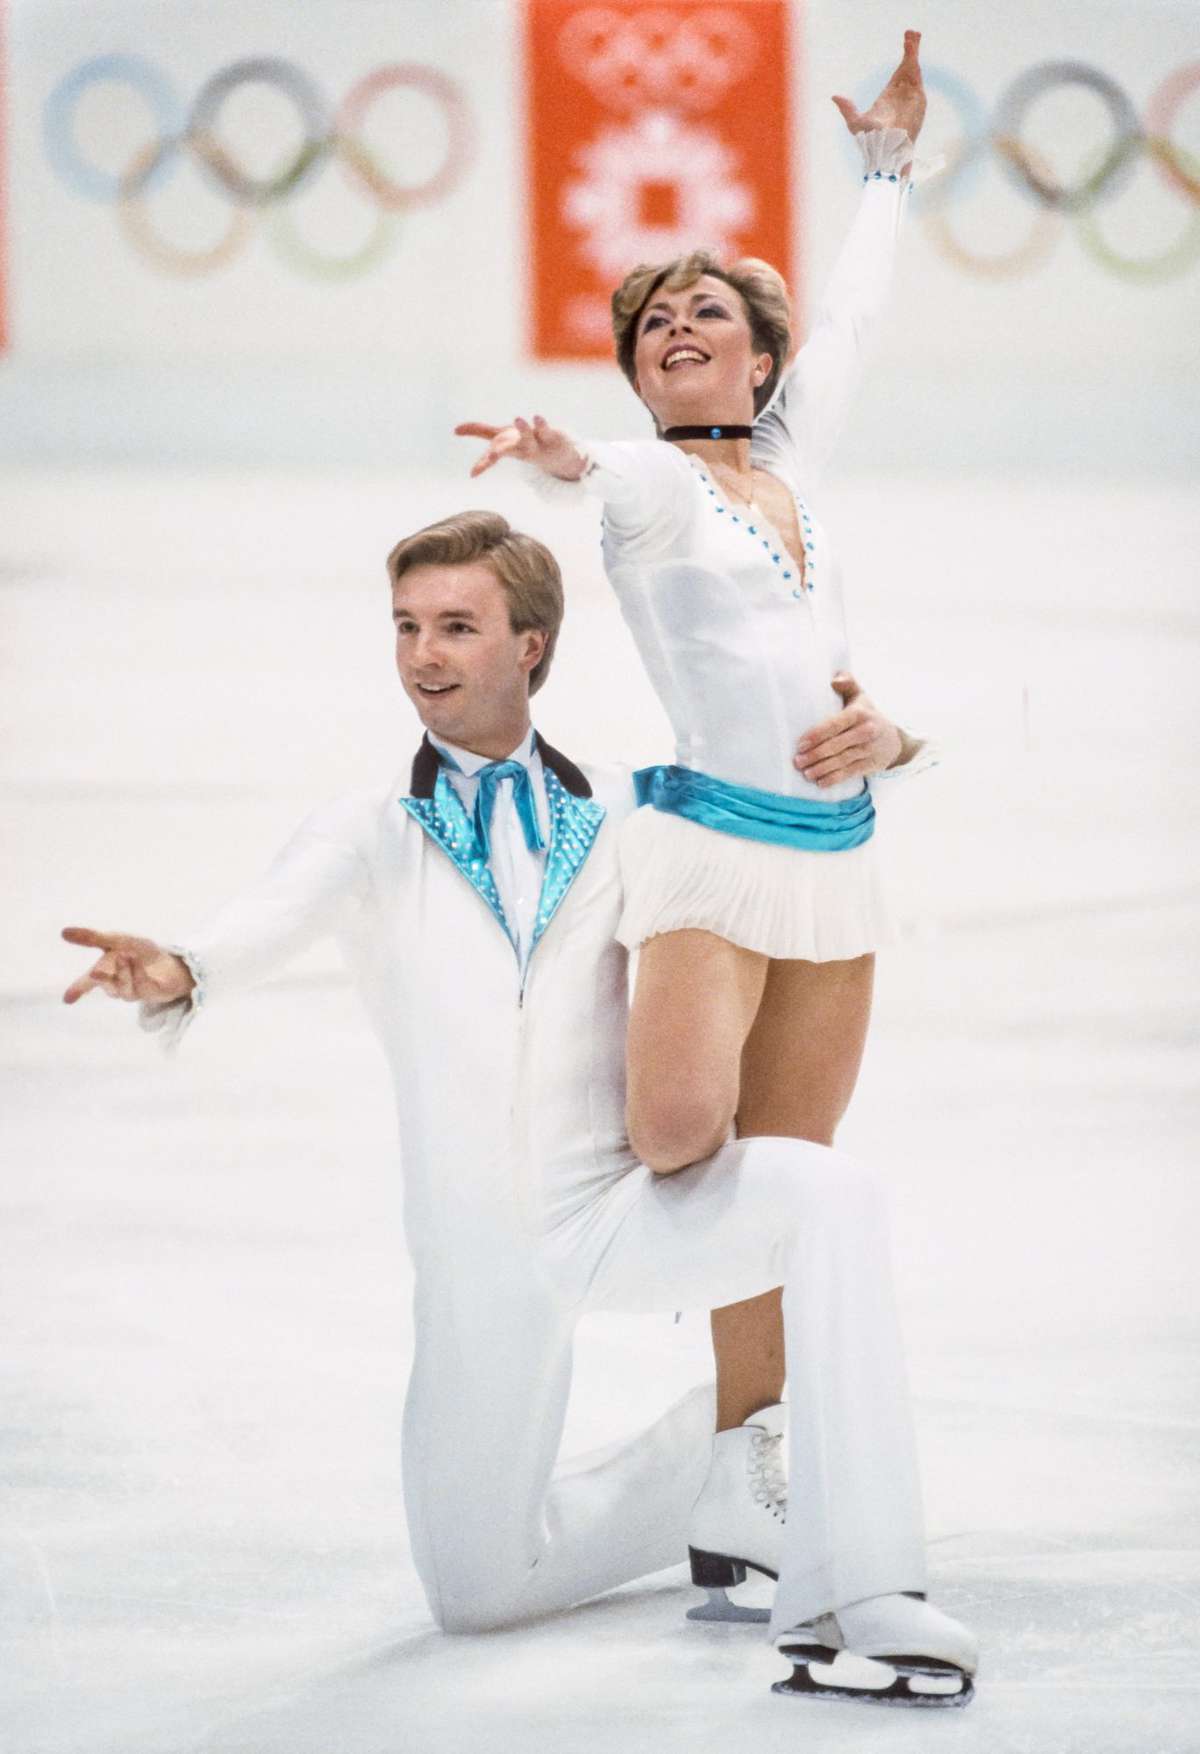 Jayne Torvill and Christopher Dean (1984 Olympic Champions) 